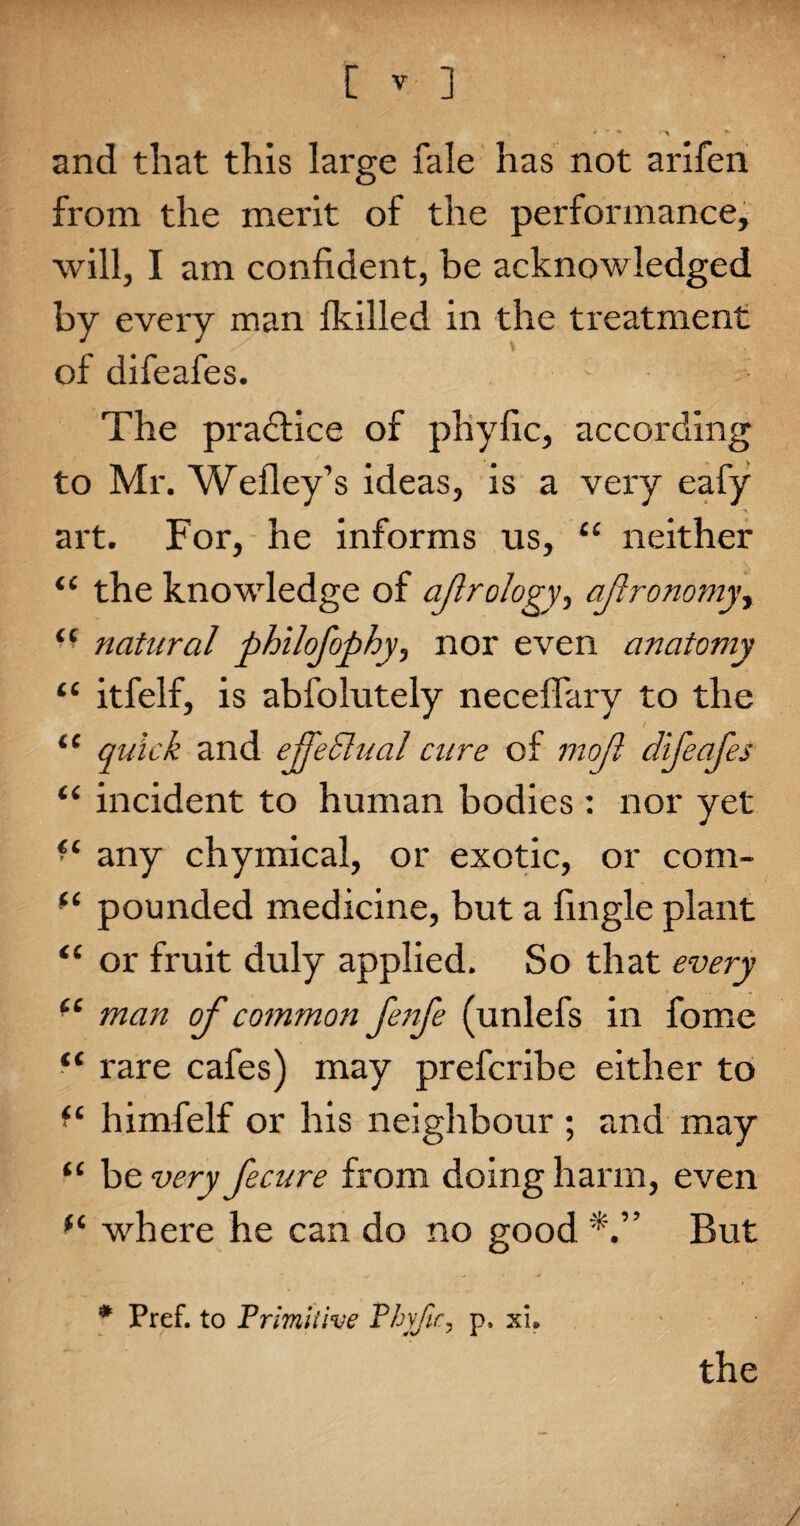 and that this large fale has not arifen from the merit of the performance, will, I am confident, be acknowledged by every man Ikilled in the treatment of difeafes. The practice of phyfic, according to Mr. Wefley’s ideas, is a very eafy art. For, he informs us, “ neither <c the knowledge of ajlrology, ajlronomy, “ natural philofophy, nor even anatomy “ itfelf, is abfolutely neceffary to the “ quick and efpeSlual cure of mo ft difeafes “ incident to human bodies : nor yet ■ ‘ any chymical, or exotic, or com- pounded medicine, but a fingle plant “ or fruit duly applied. So that every cc man of common fenfe (unlefs in fome “ rare cafes) may prefcribe either to himfelf or his neighbour ; and may “ be very fecure from doing harm, even f( where he can do no good But * Pref. to Primitive Phyfic, p» xi# the /